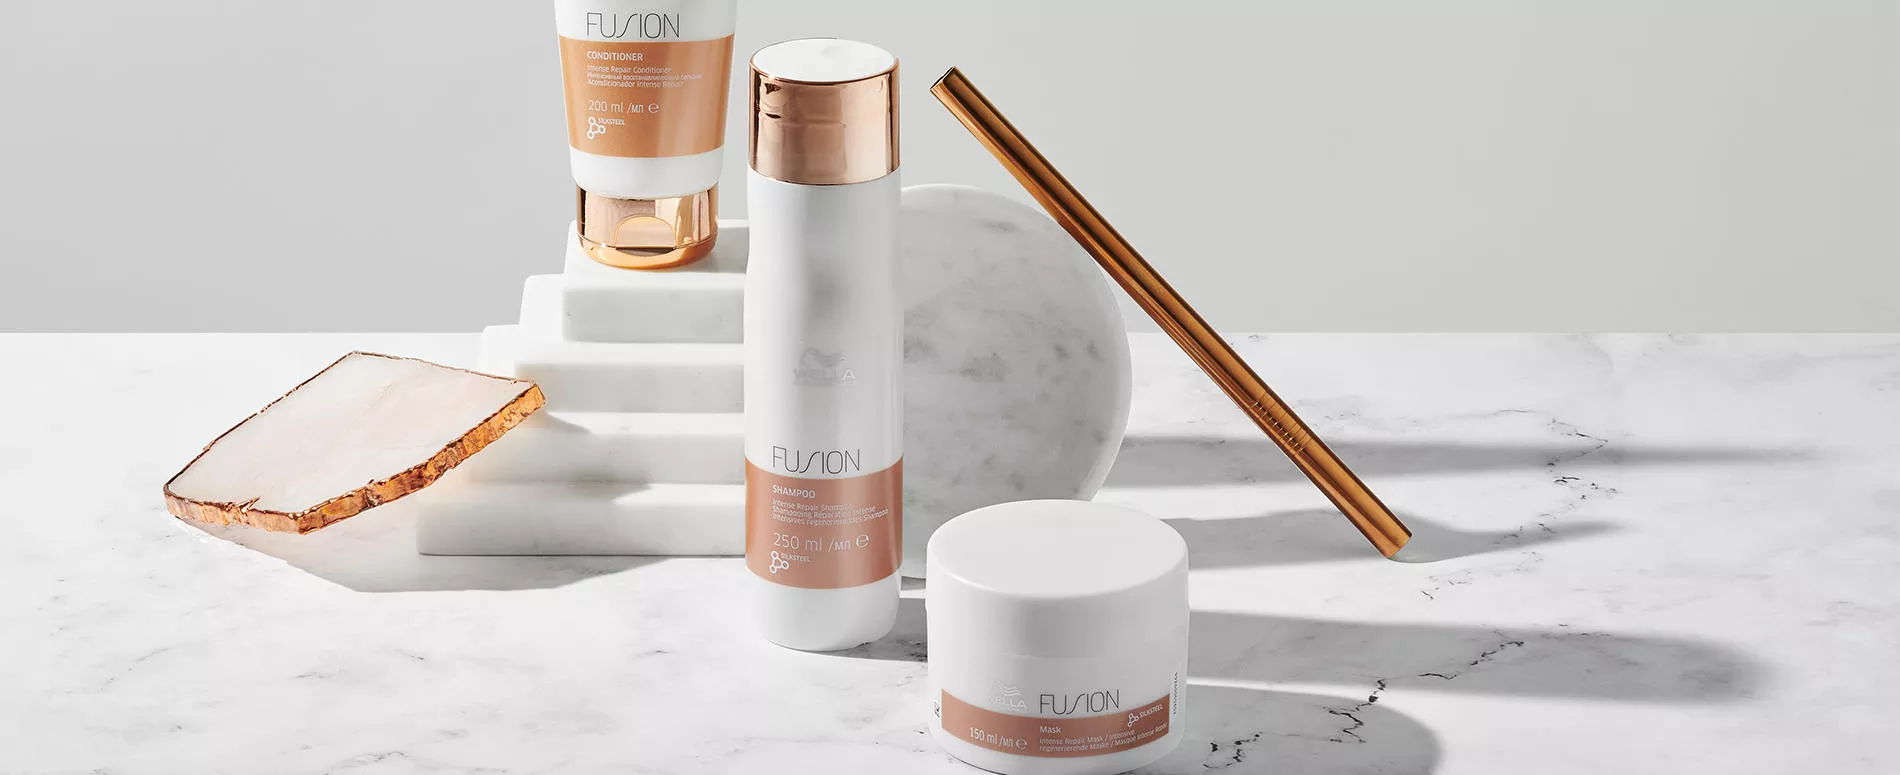 New Wella Professionals Fusion care range protects hait against breakage and damages.  Nourishes the hair and makes damaged hair feel renewed, smooth and elastic.